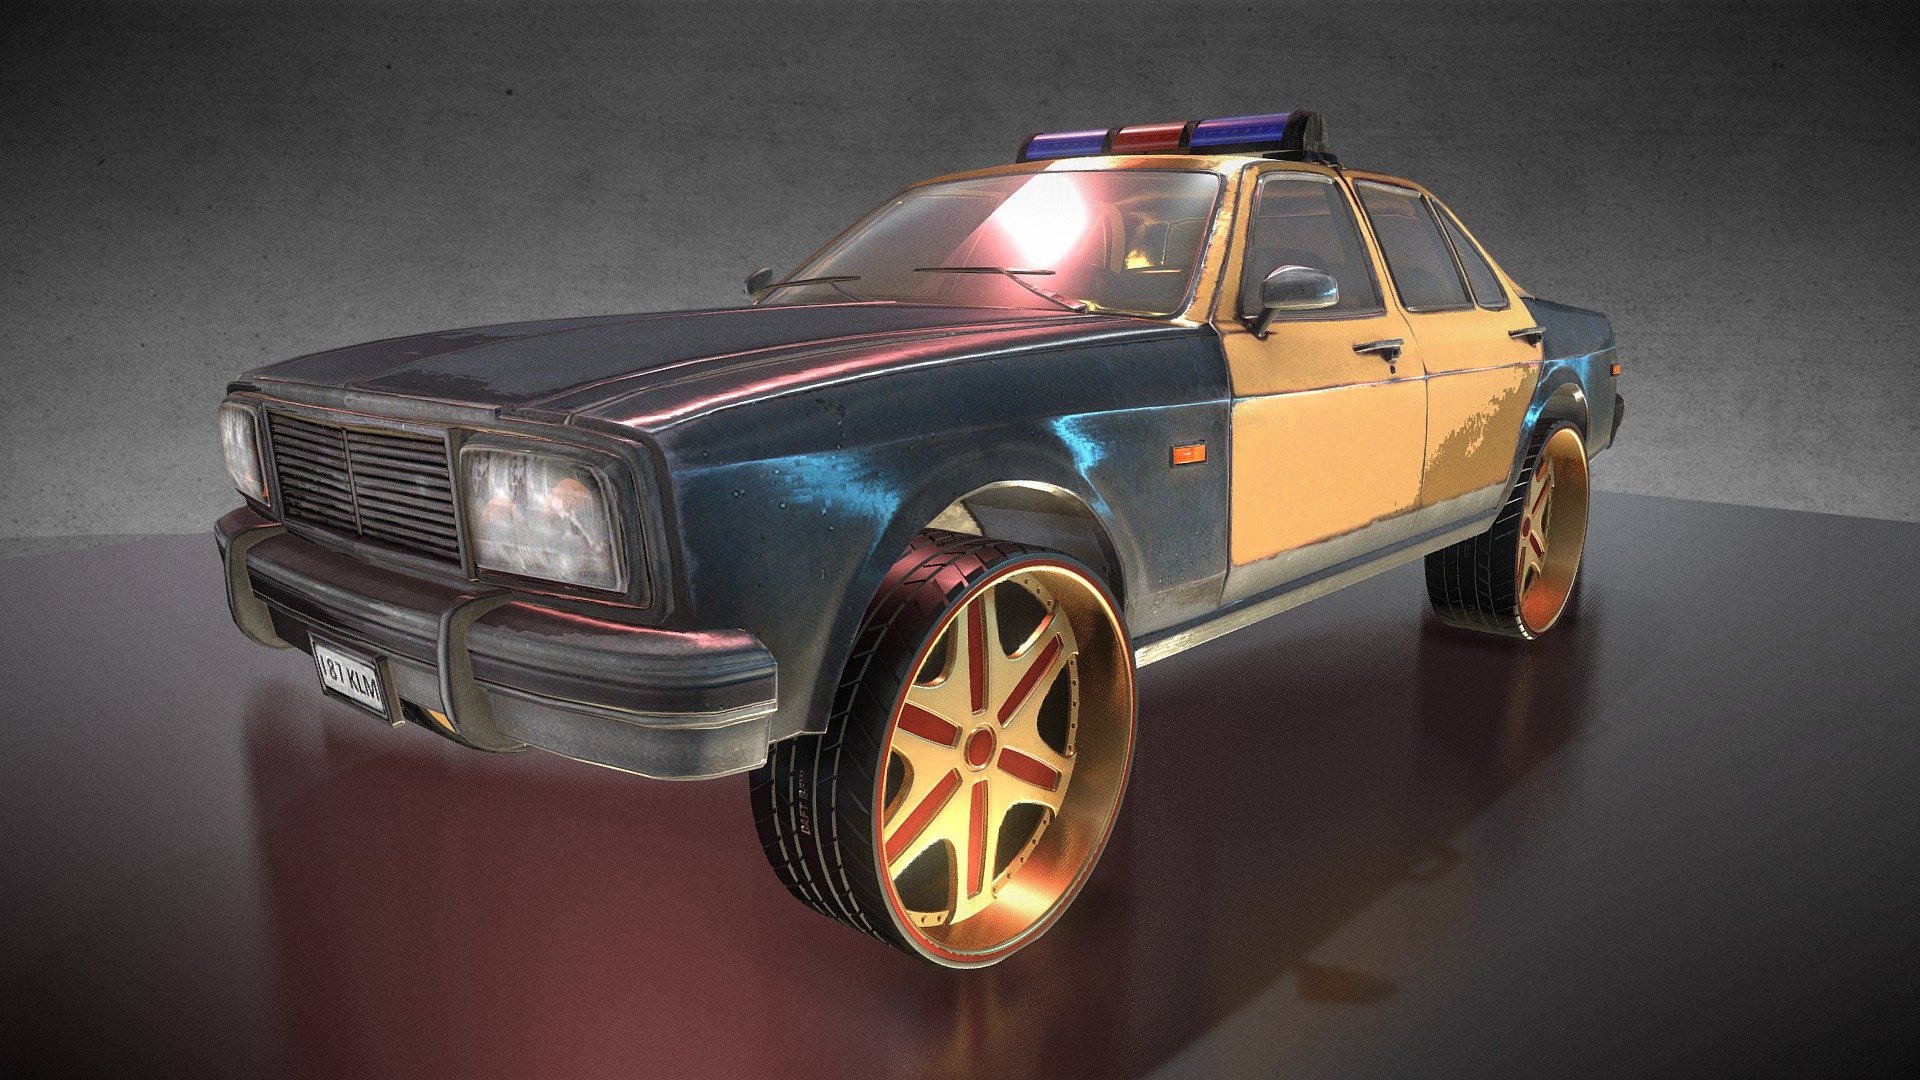 A police Donk.. because reasons.

Hello again my Sketchfams.. I been busy with DIY projects recently but I'll always come back.

Sketchfab is almost home. Easily the best platform for creators to exchange their works..

It's an 82 Malibu for anyone who wants to know 3d model